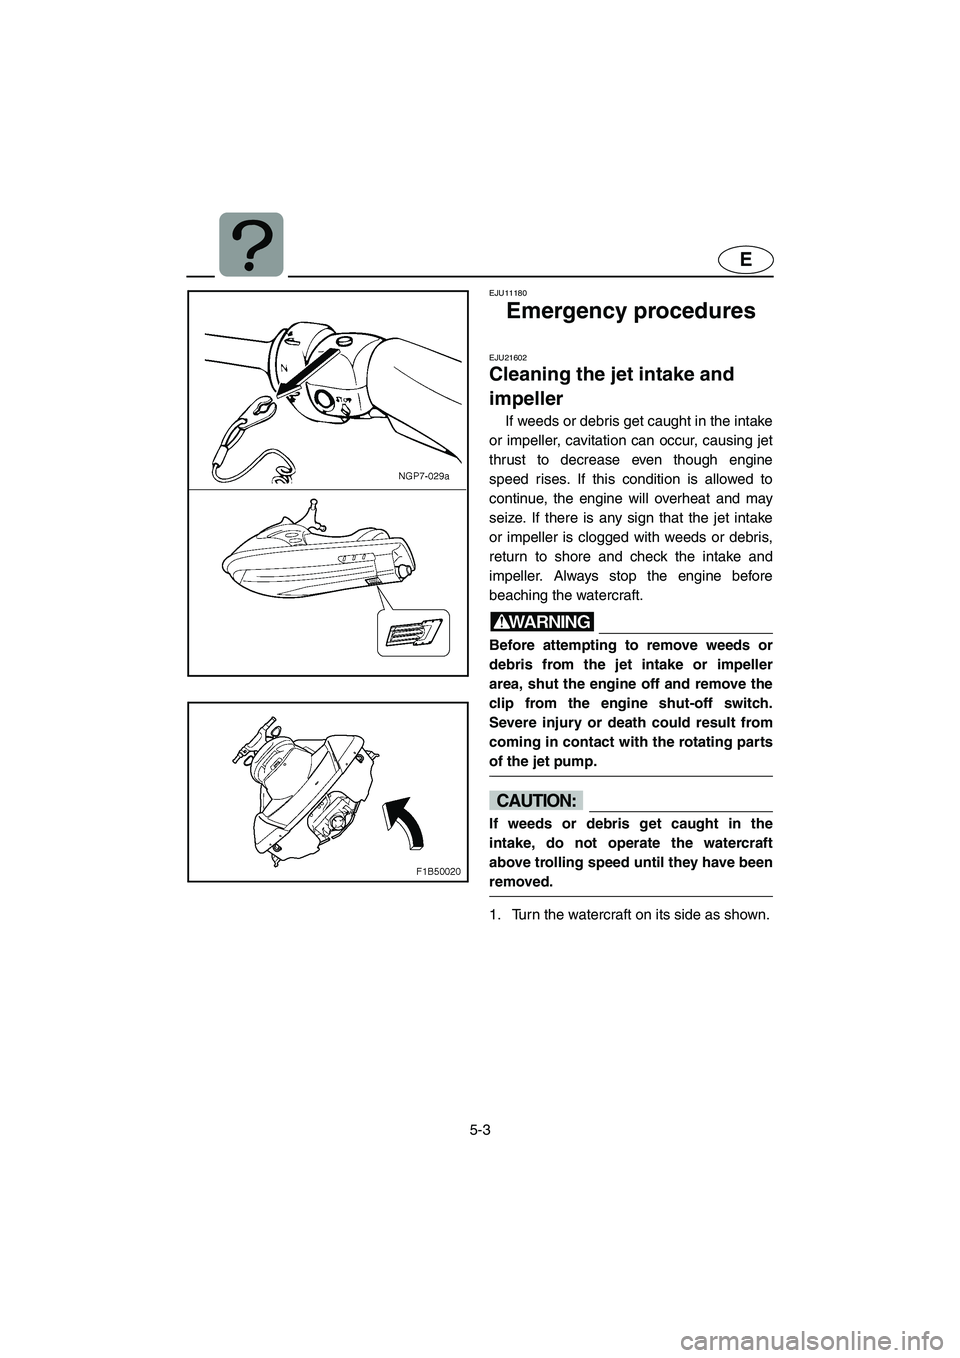 YAMAHA FX HO 2006  Owners Manual 5-3
E
EJU11180 
Emergency procedures  
EJU21602 
Cleaning the jet intake and 
impeller 
If weeds or debris get caught in the intake
or impeller, cavitation can occur, causing jet
thrust to decrease ev